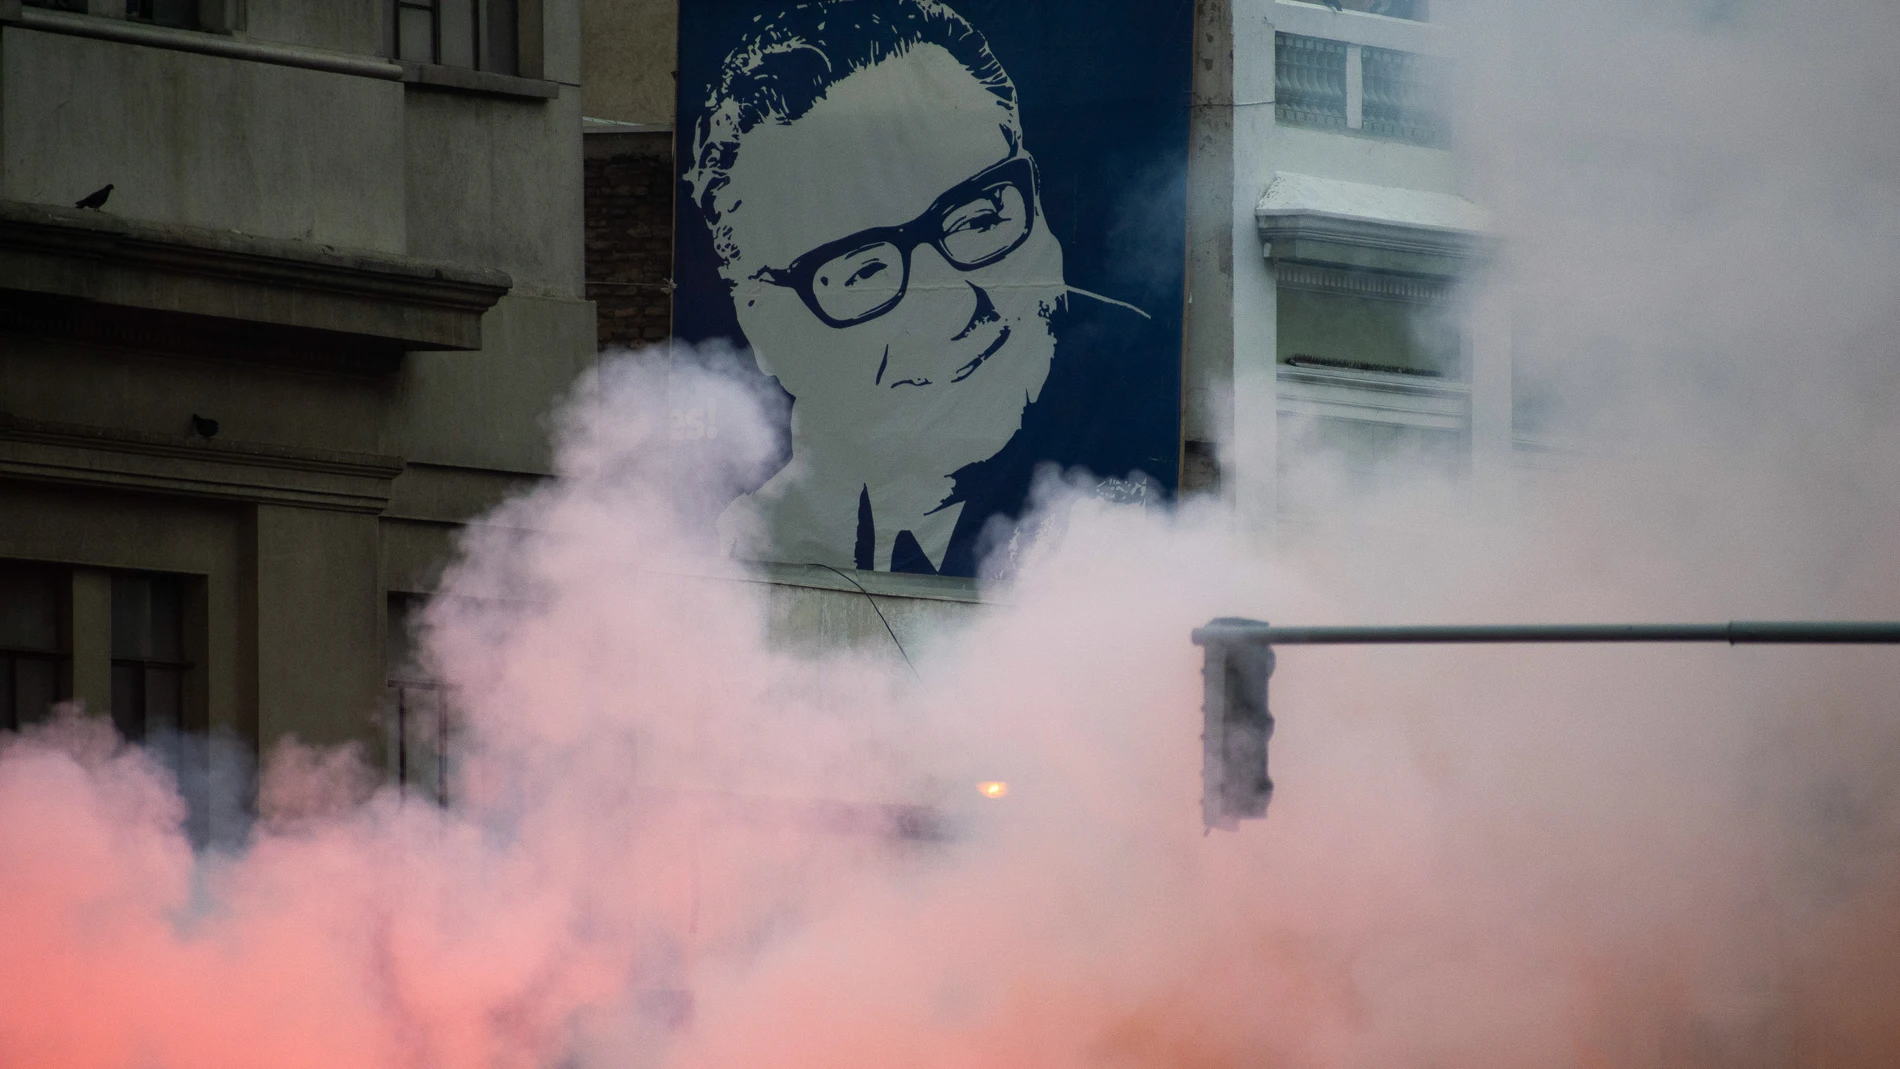 September 10, 2023, Santiago, Metropolitana, Chile: A mural of Savlador Allende is seen amidst the smoke from flares during a march marking the 50th anniversary of the military coup led by Augusto Pinochet that overthrew President Allende, in Santiago, Chile. 10/09/2023